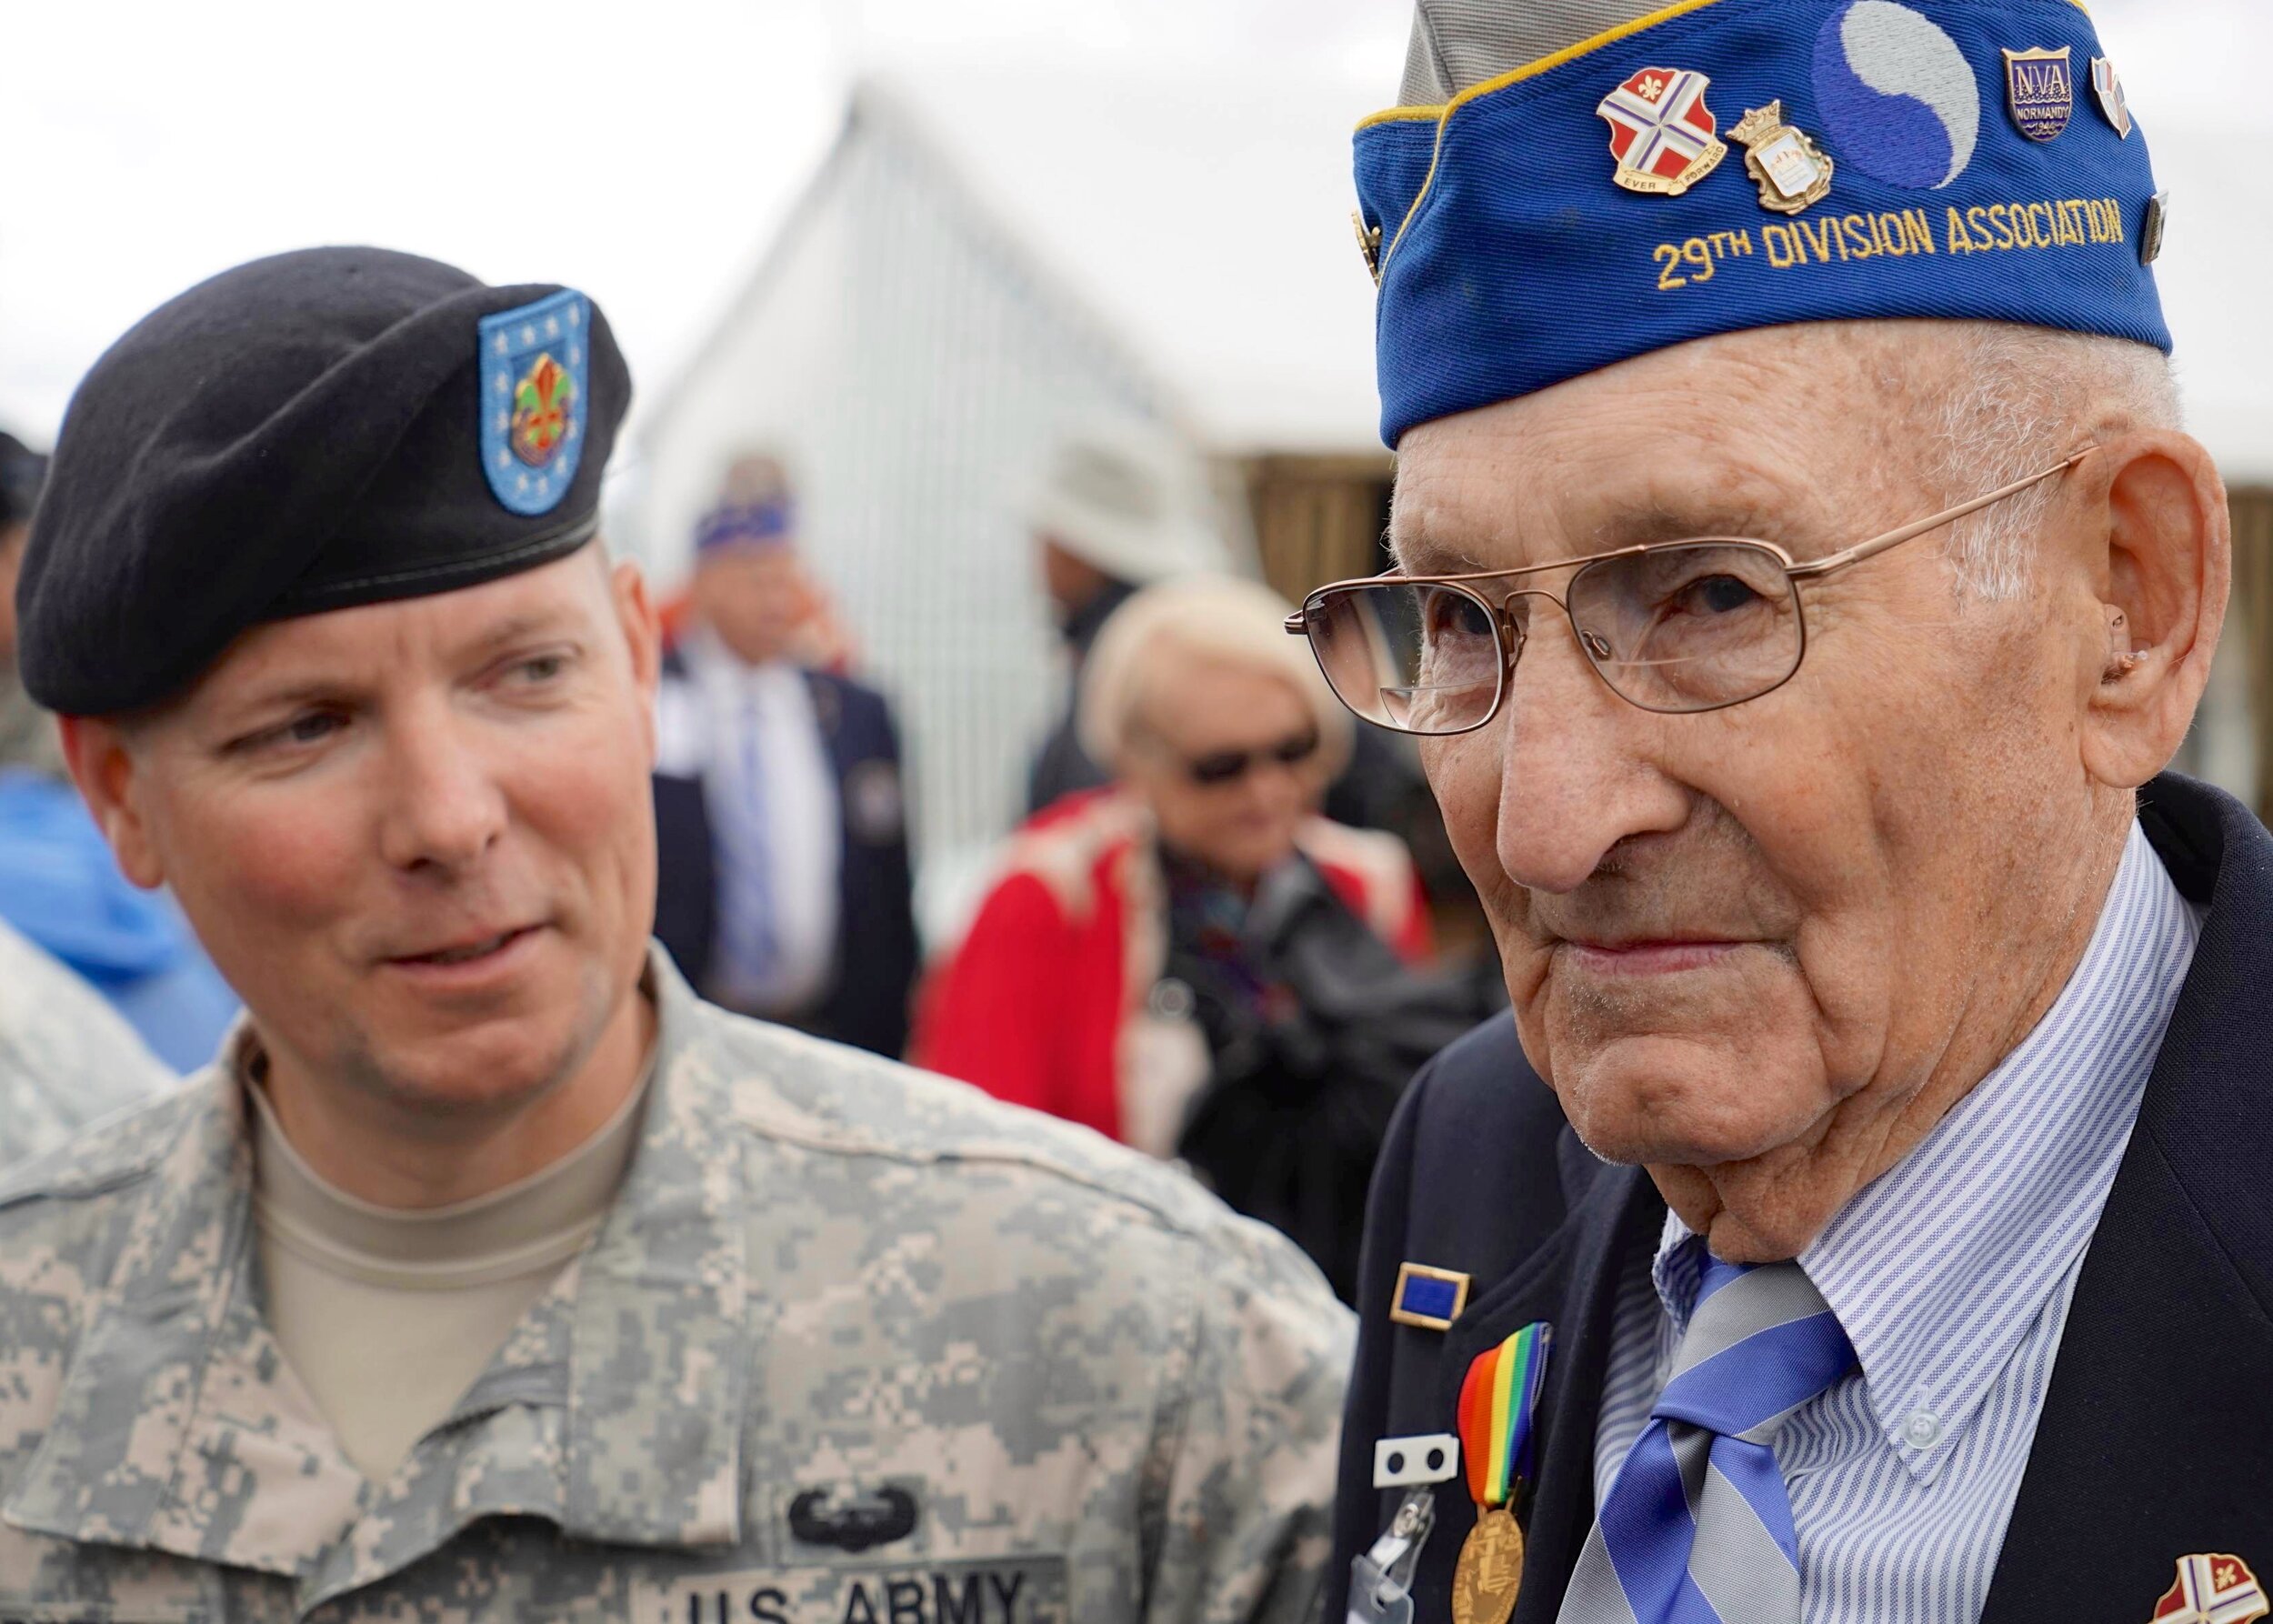  D-Day veteran Arden Earll with current “29er” at the ceremony. Arden is a Pennsylvania native who landed on Omaha Beach in the first minutes of the D-Day invasion as a member of Company H, 116th Infantry, 29th Division. He holds two Purple Hearts fo